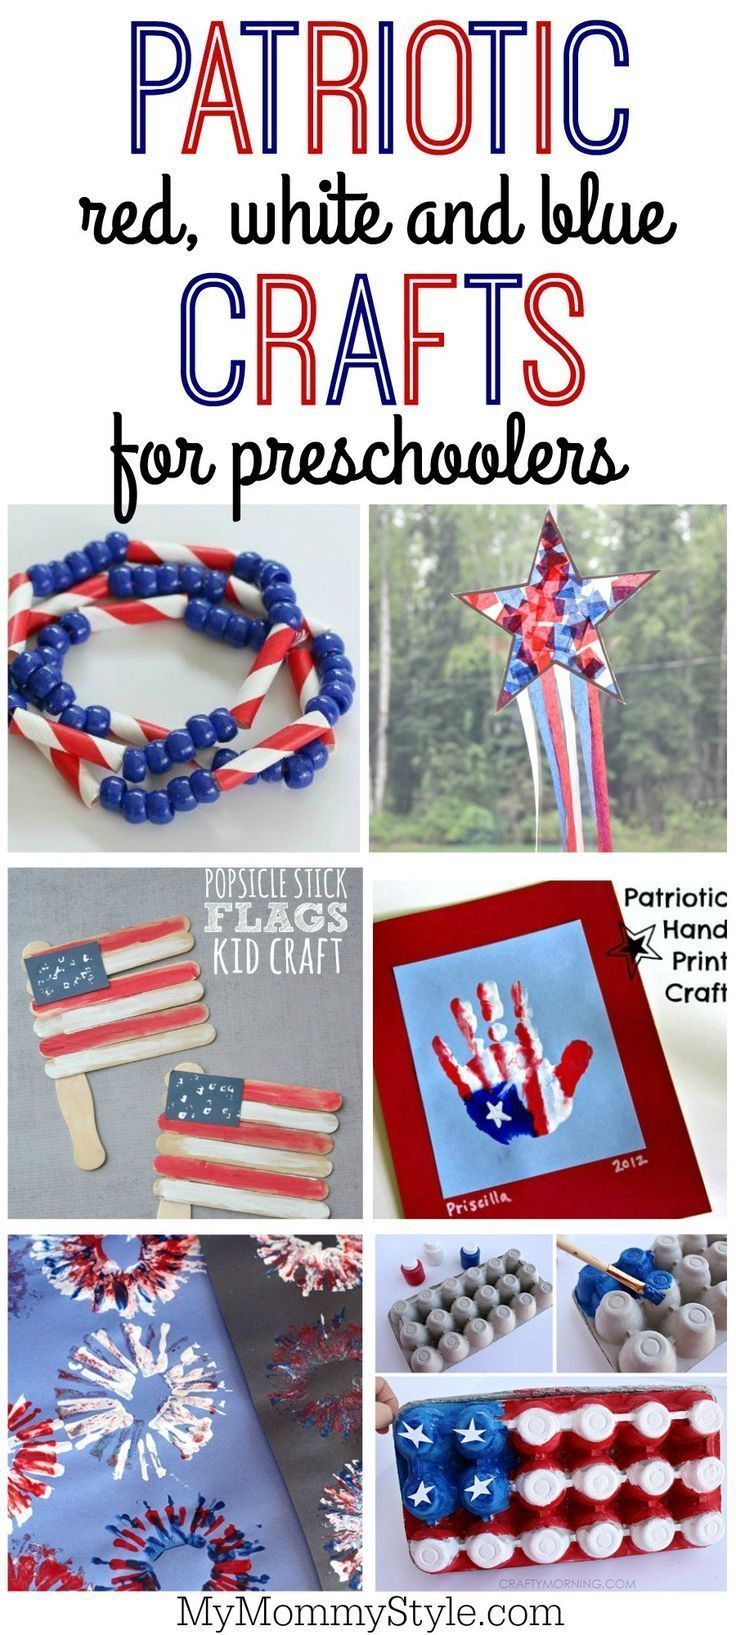 25 Patriotic crafts for kids -   22 4th of july preschool crafts
 ideas